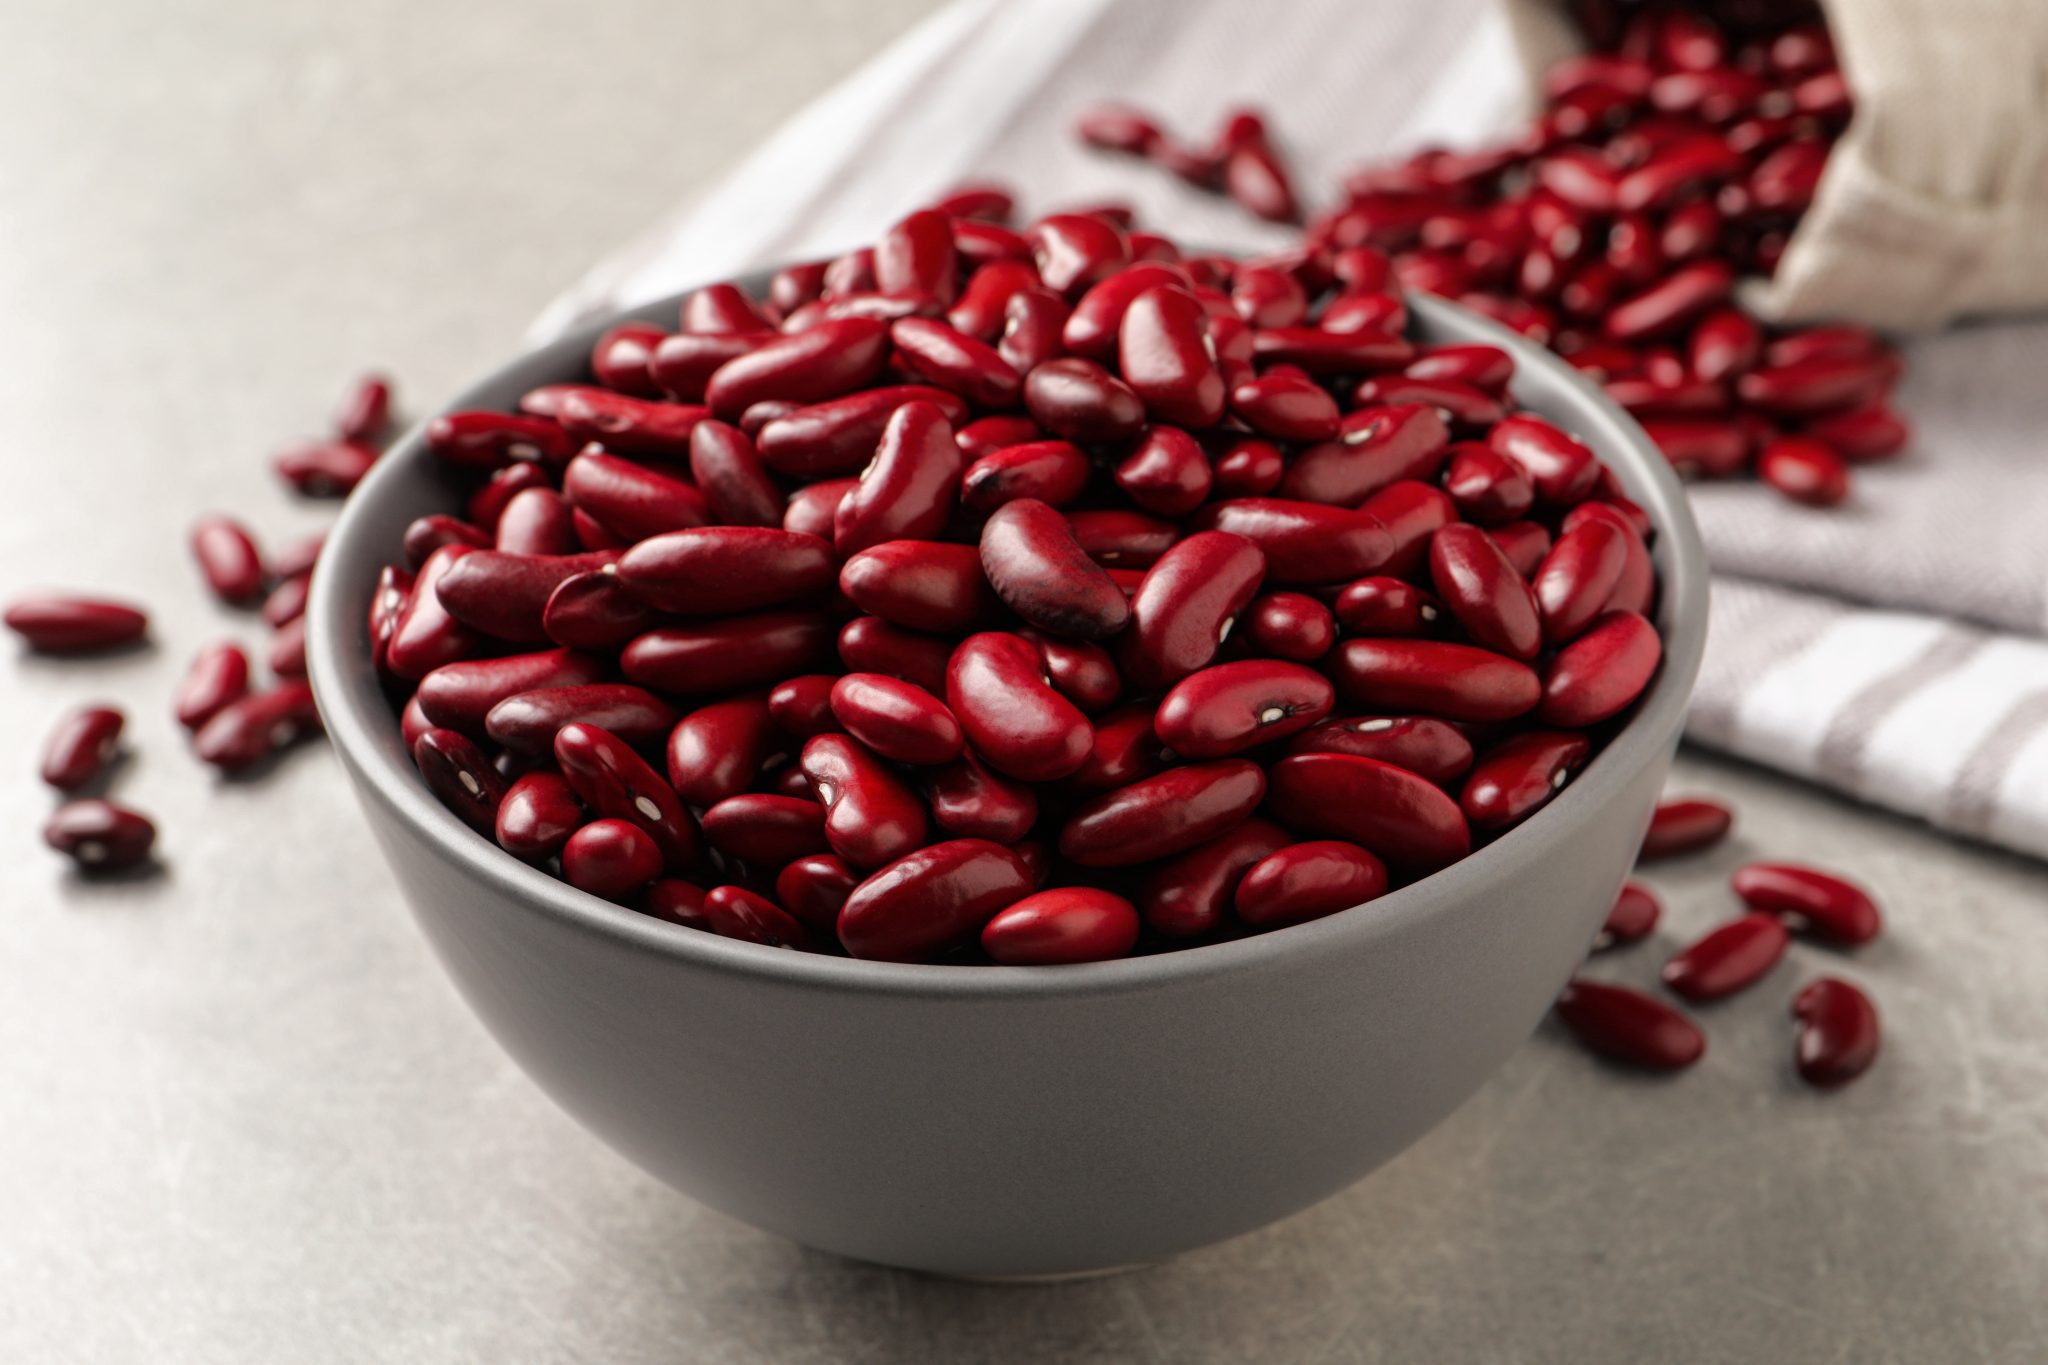 How to cook dry beans